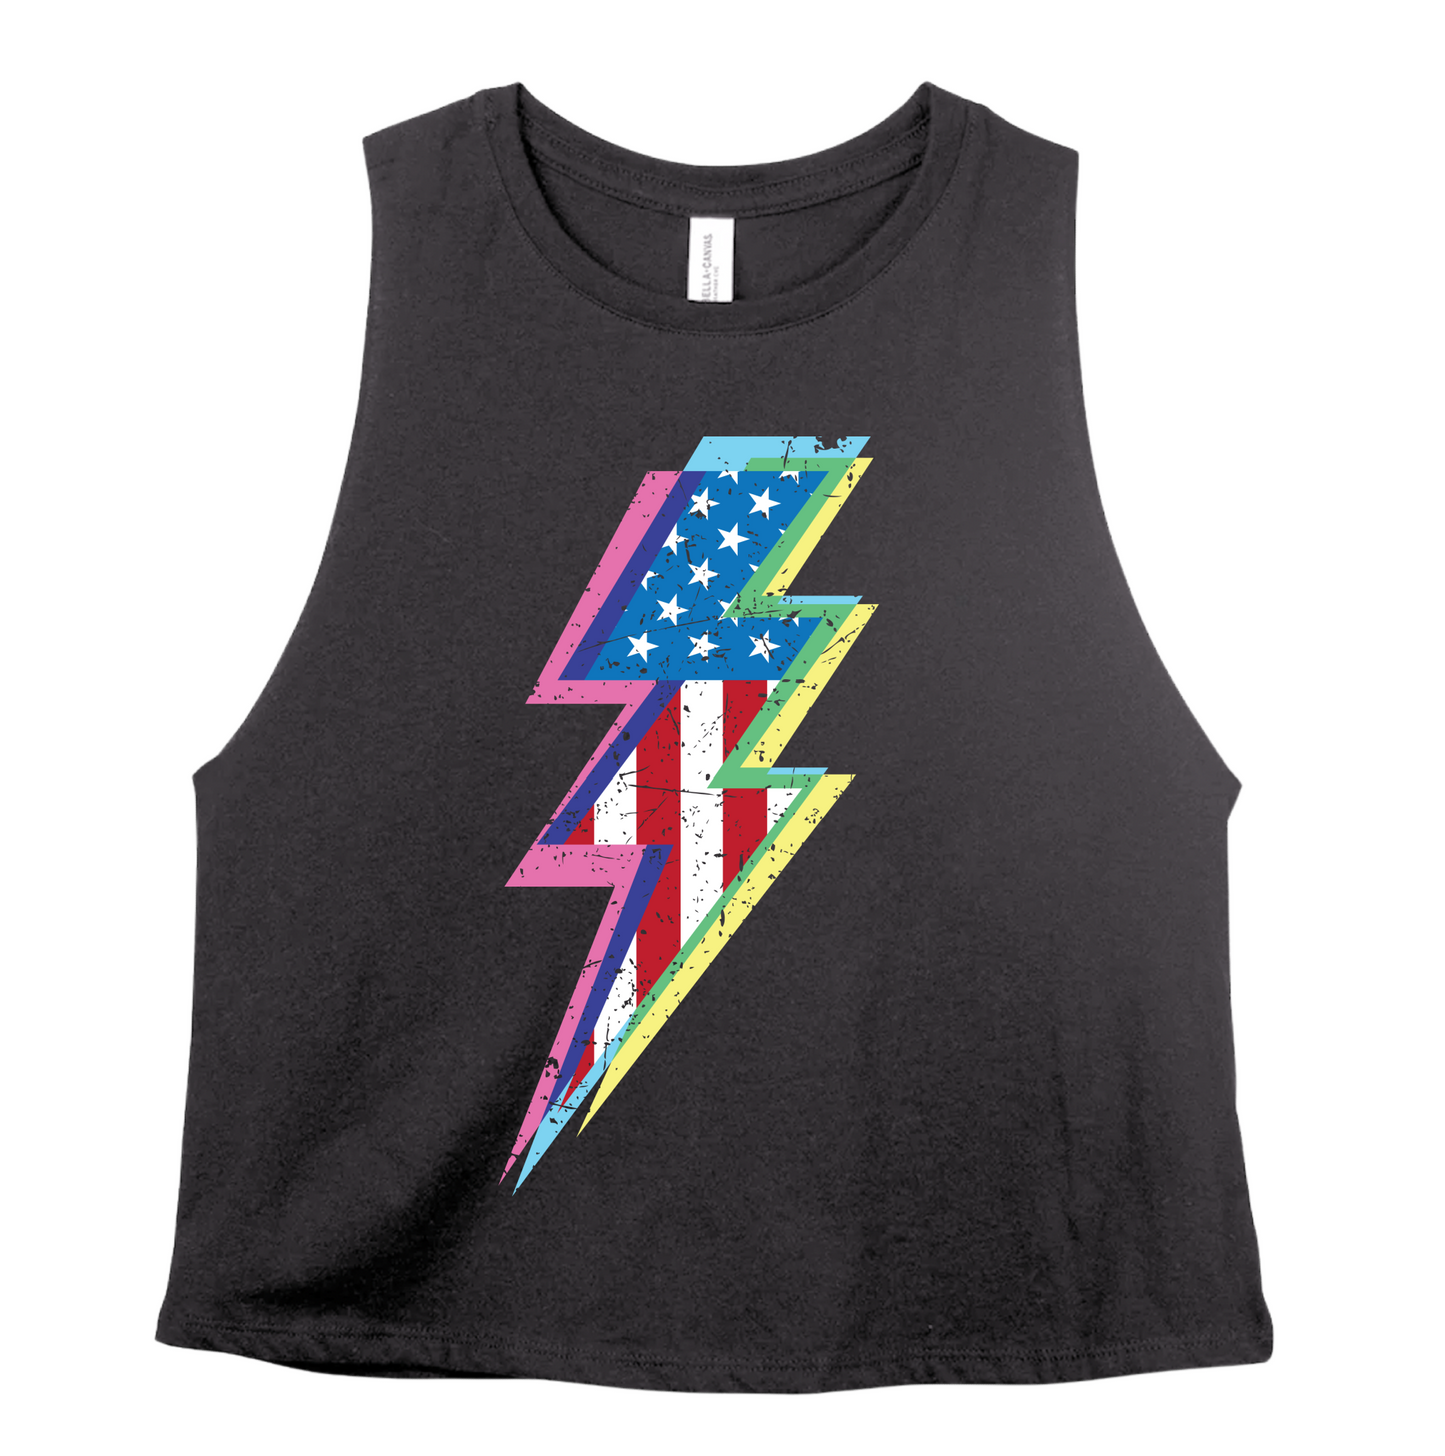 Bella Canvas USA Lightning Bolt CROPPED Tank / Memorial Day or July 4th Tank